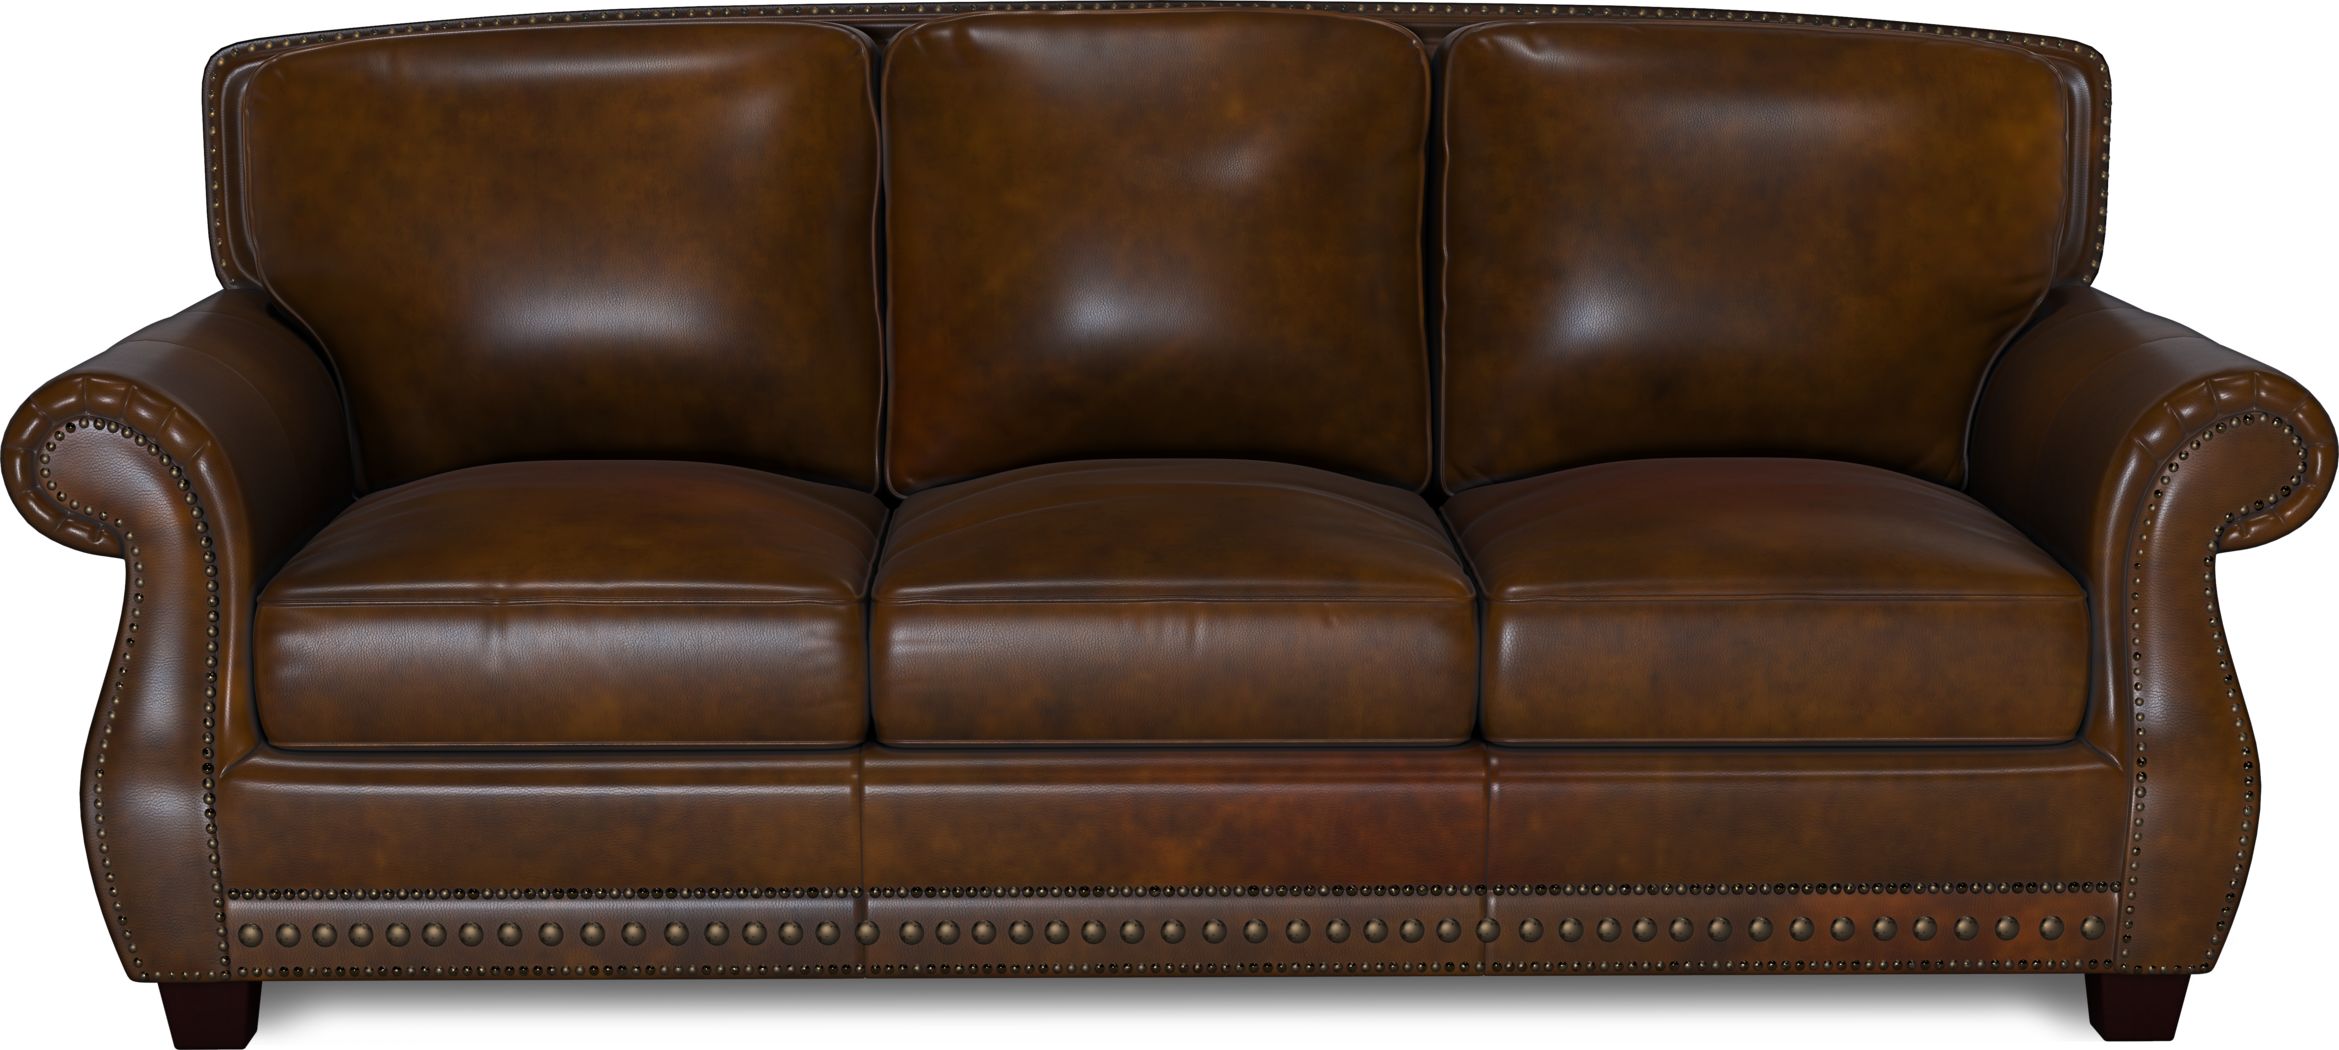 cindy crawford leather sofa rooms to go